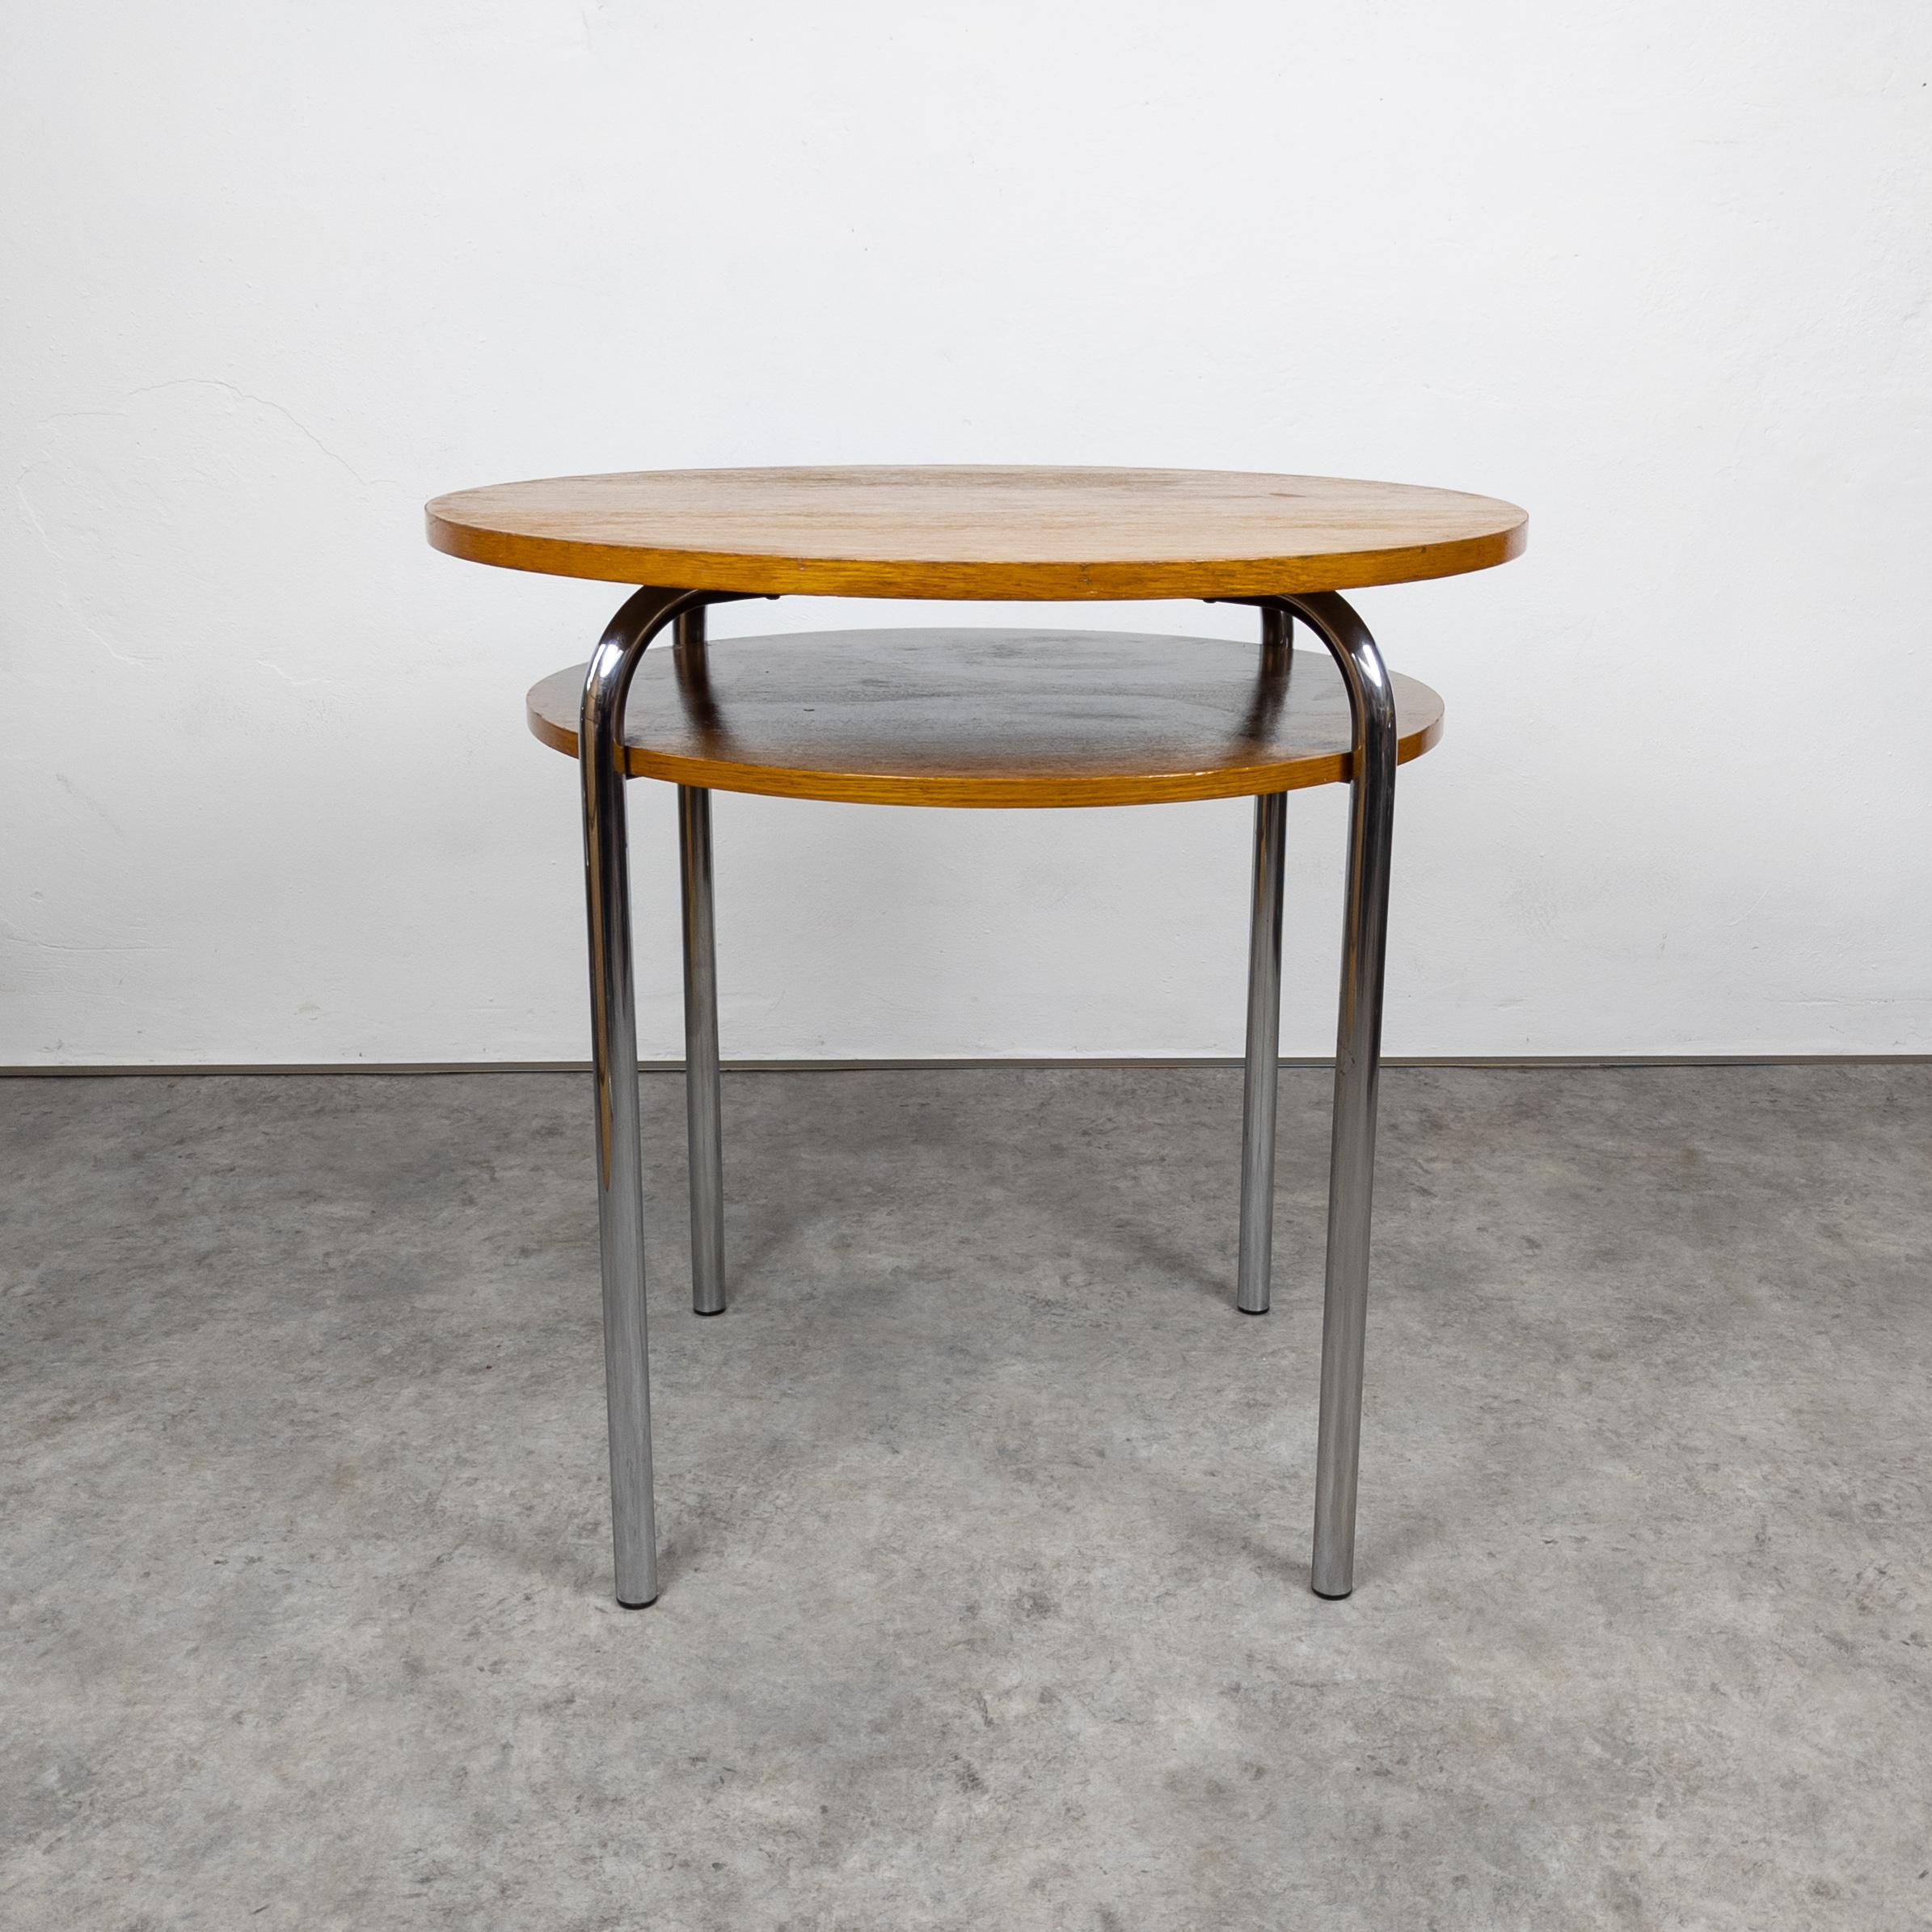 Bauhaus Tubular Steel Table by Petr Vichr for Vichr a Spol In Good Condition For Sale In PRAHA 5, CZ